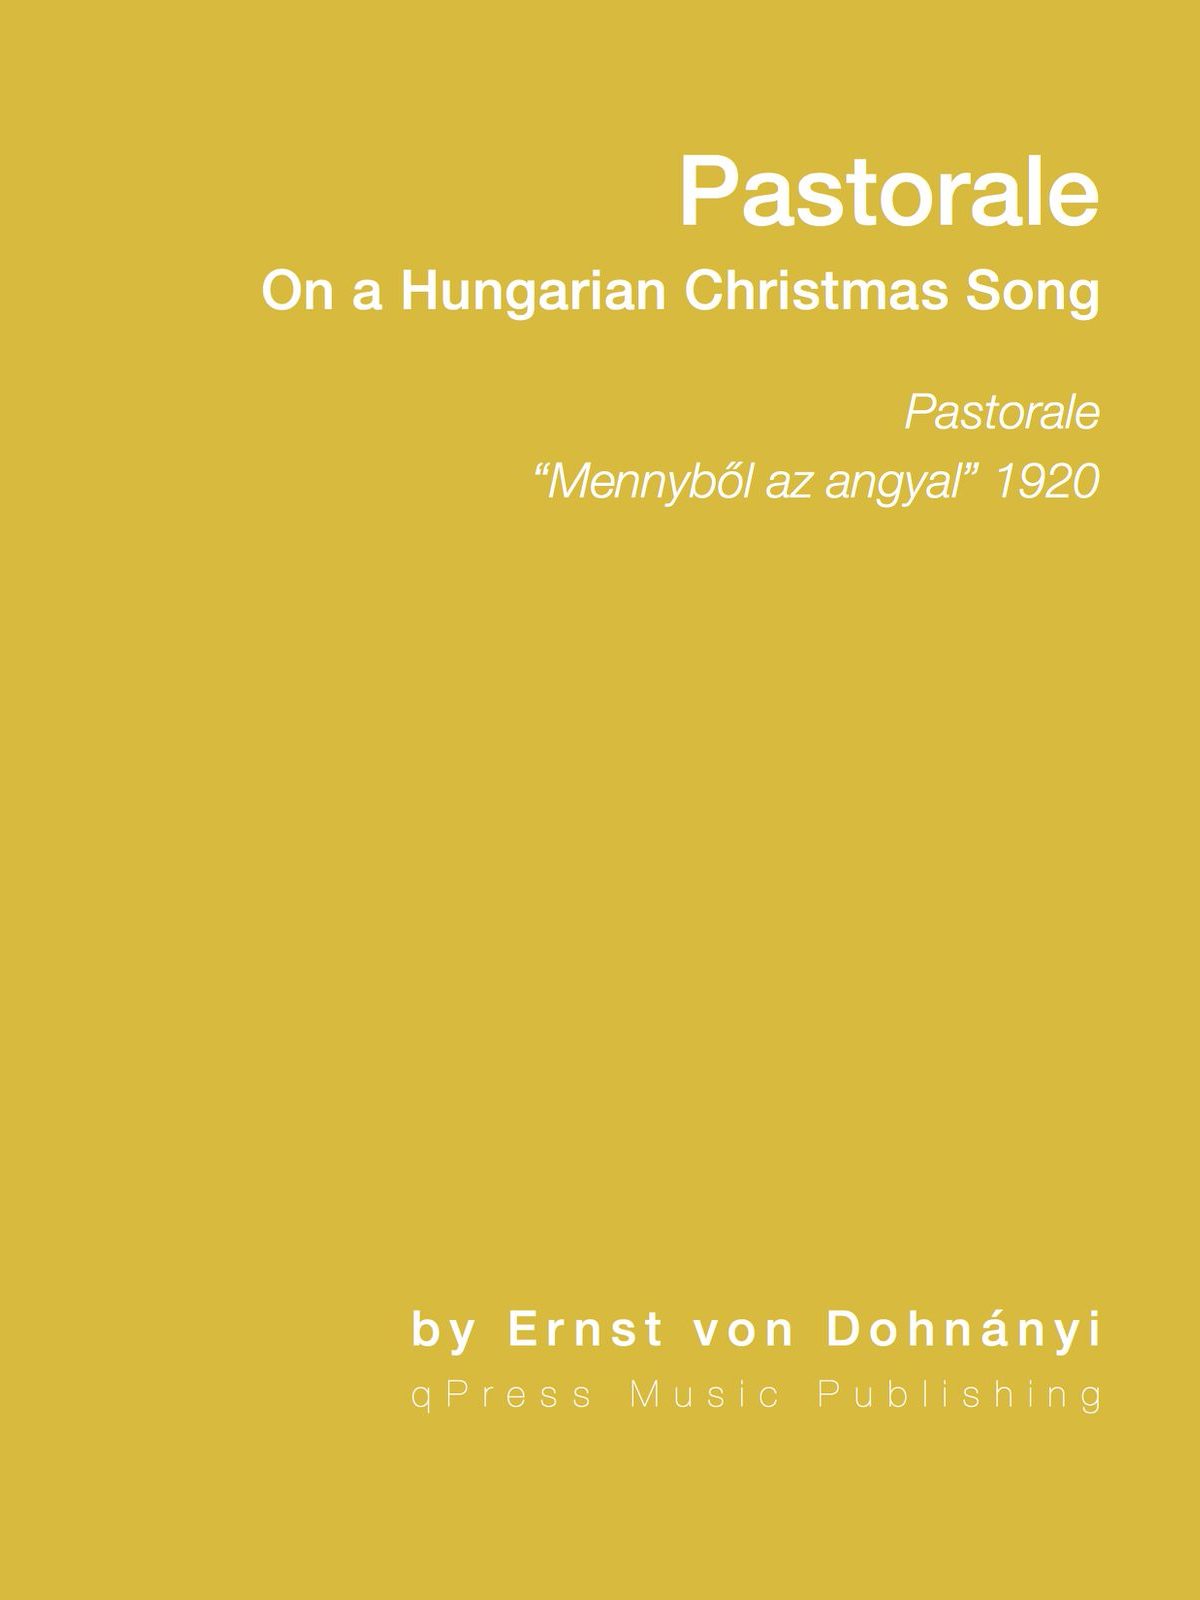 Dohnanyi, Pastorale on a Hungarian Christmas Song-p01